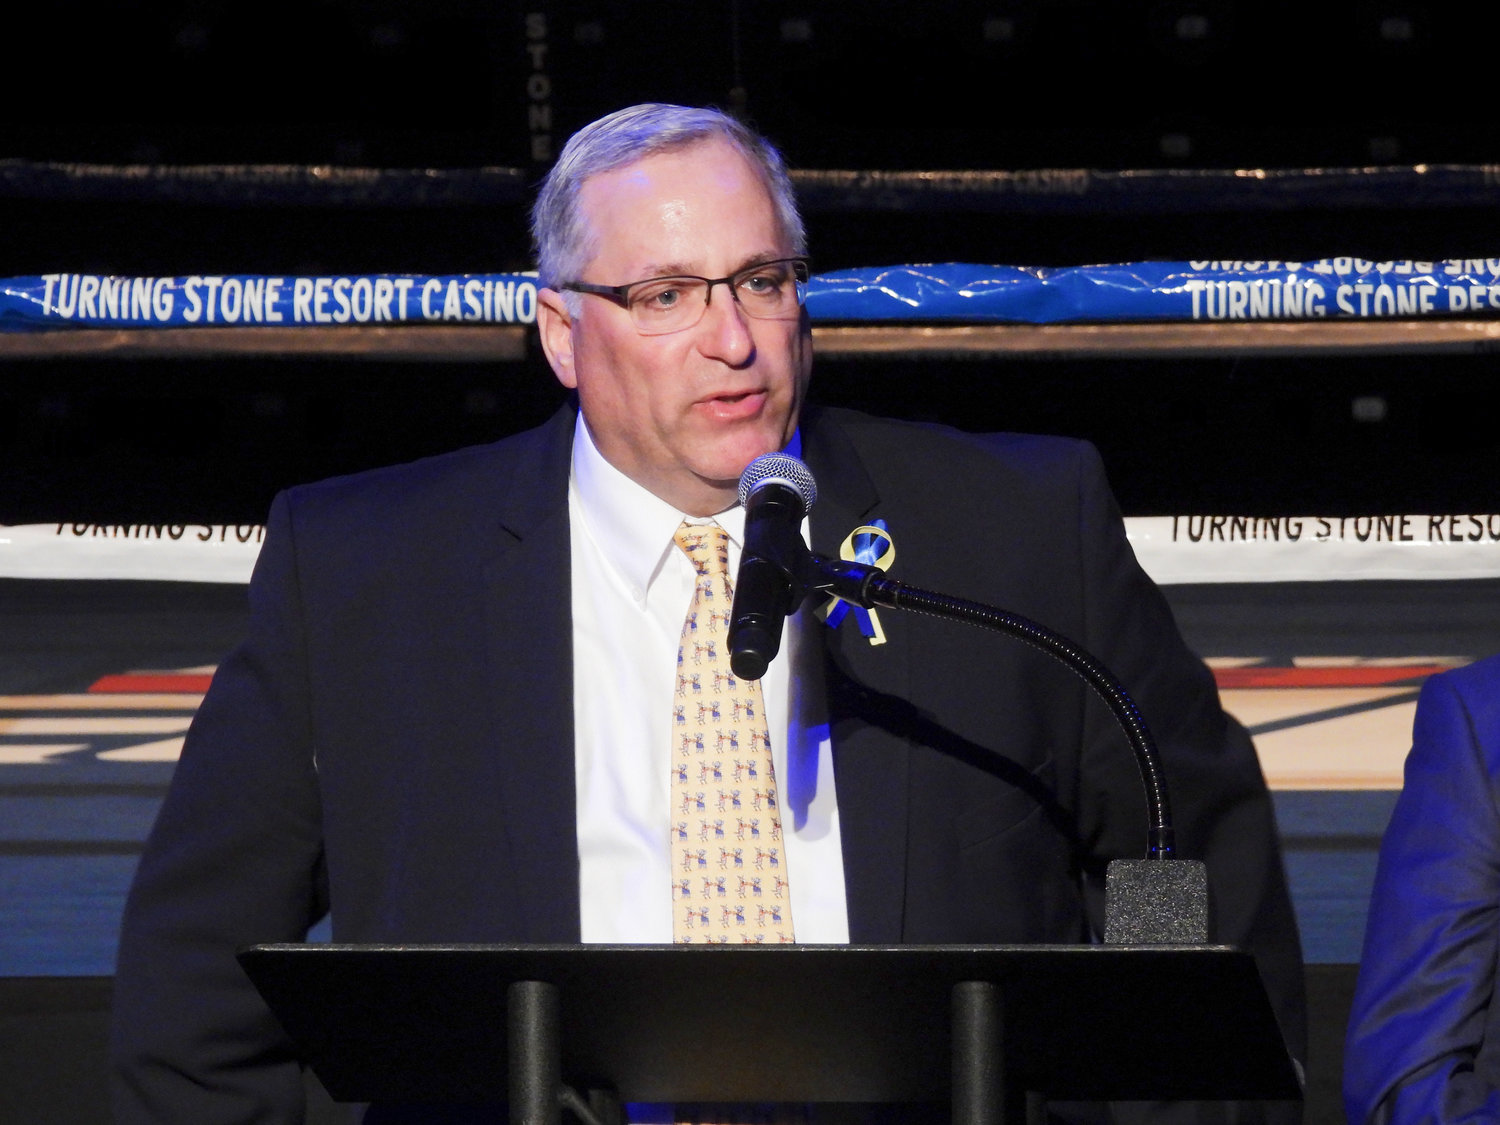 Madison County Chairman John Becker speaks at a press conference on Thursday at the Turning Stone, kicking off the Boxing Hall of Fame Weekend